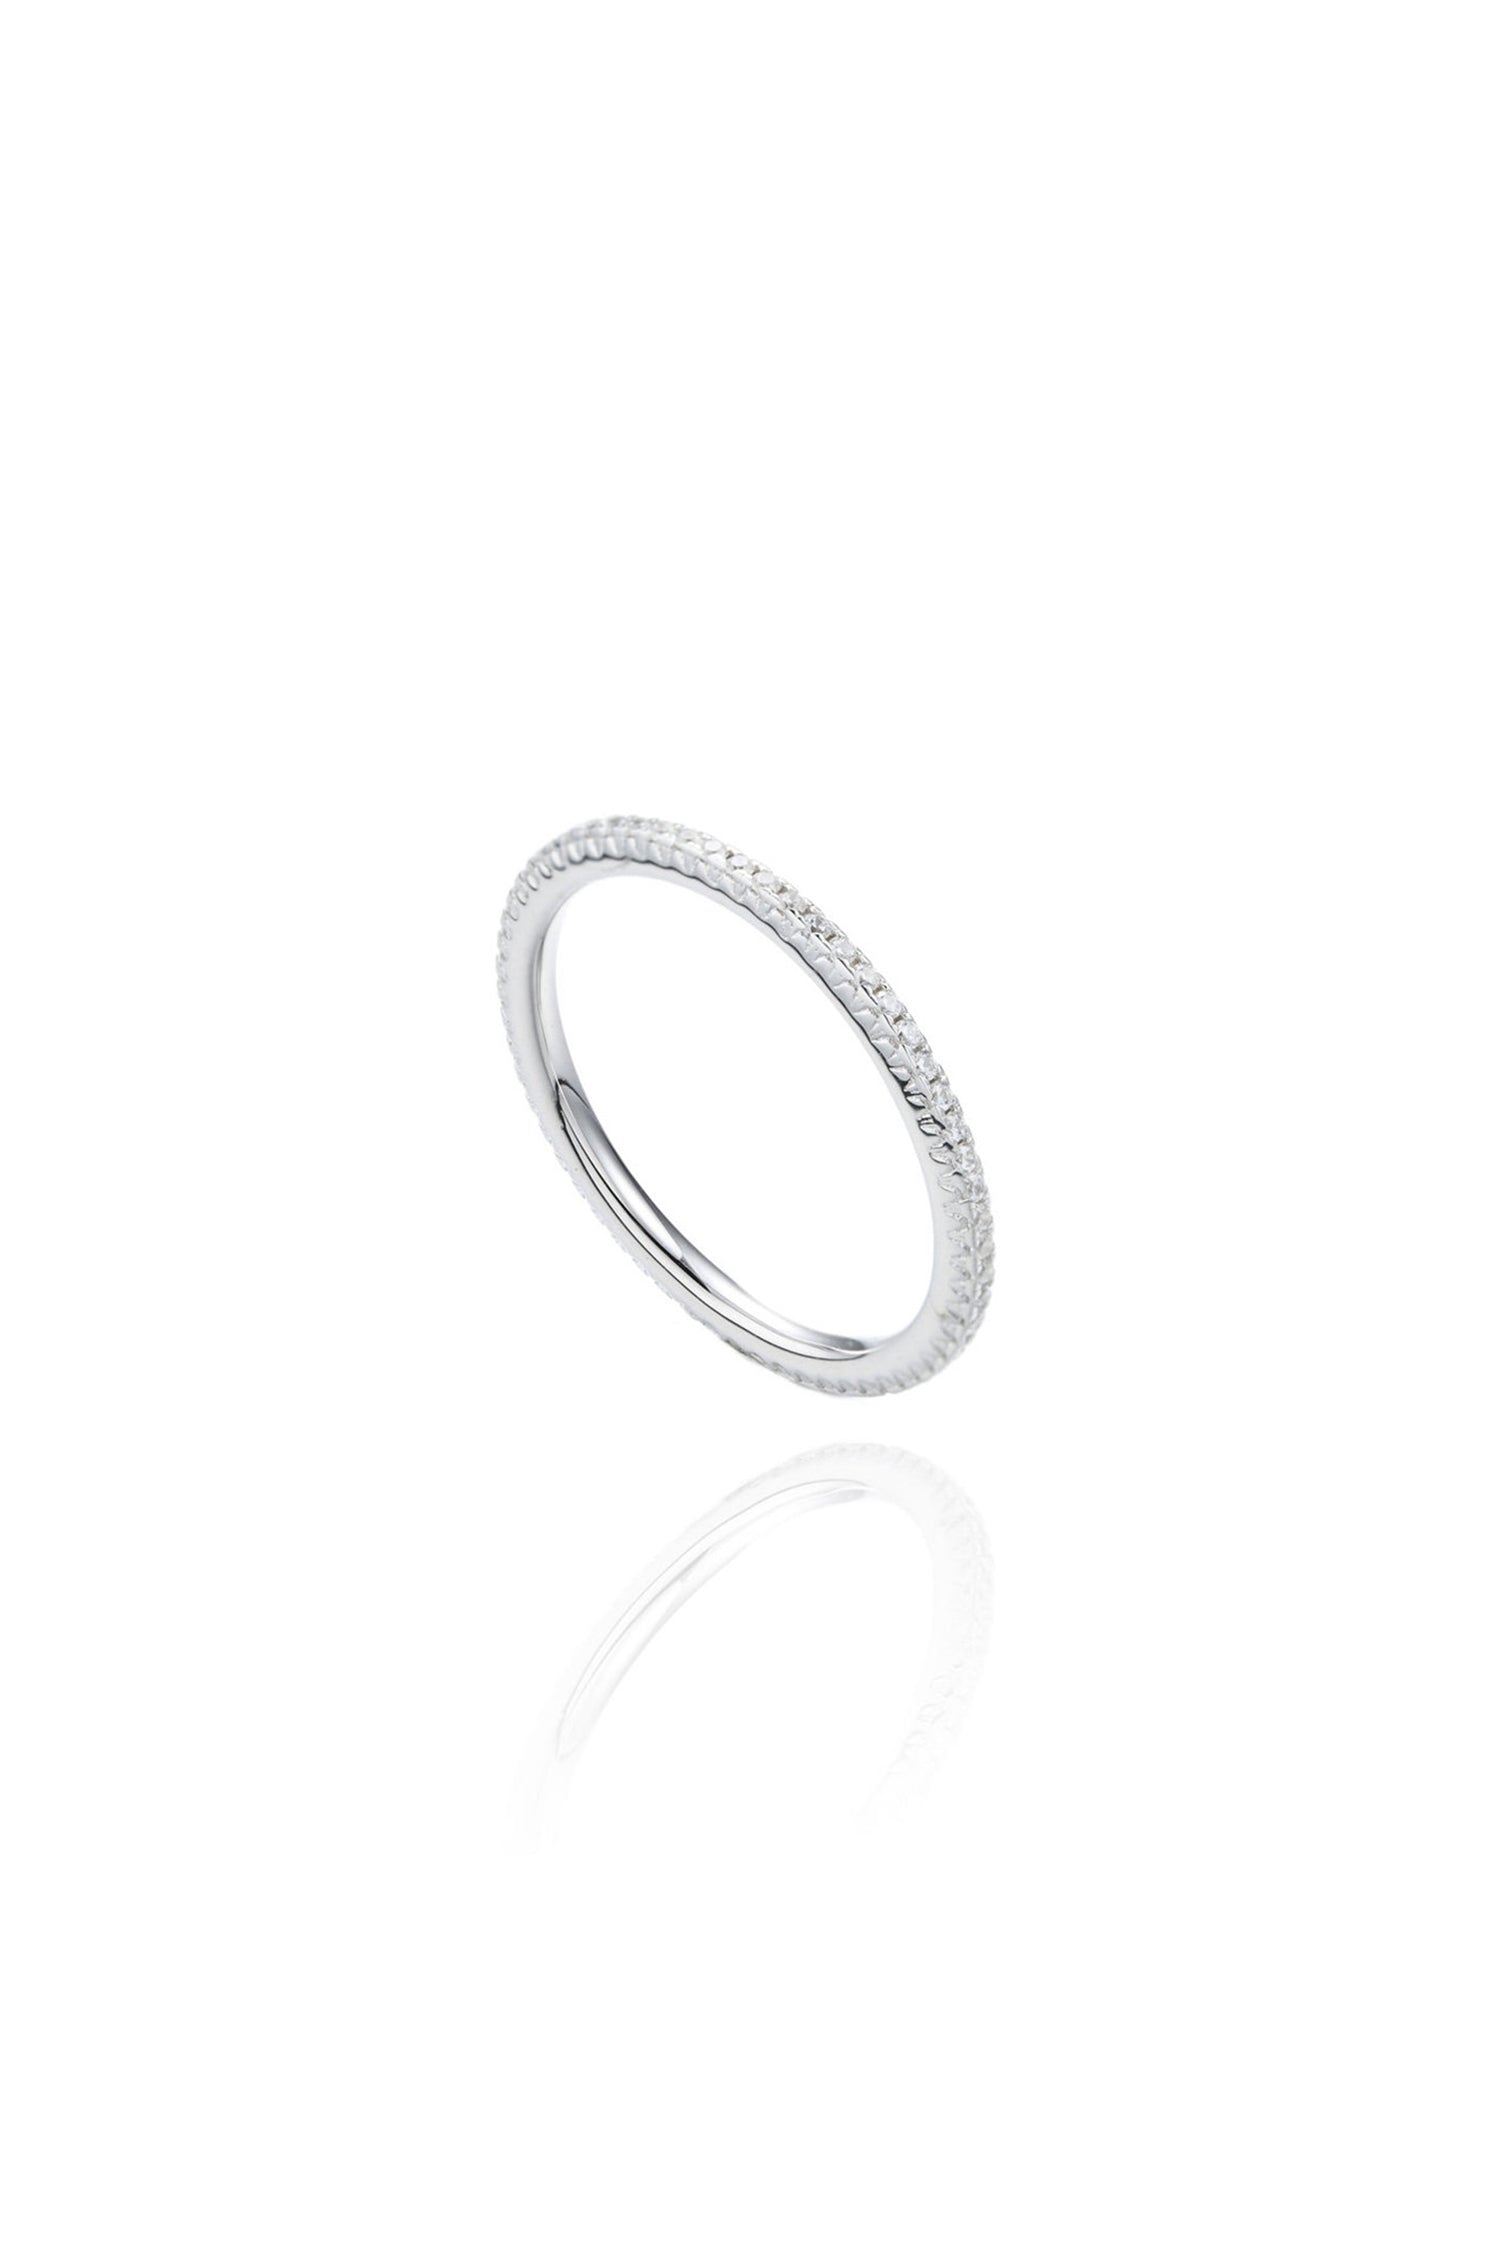  Eternity Pave Ring Sterling Silver White Background